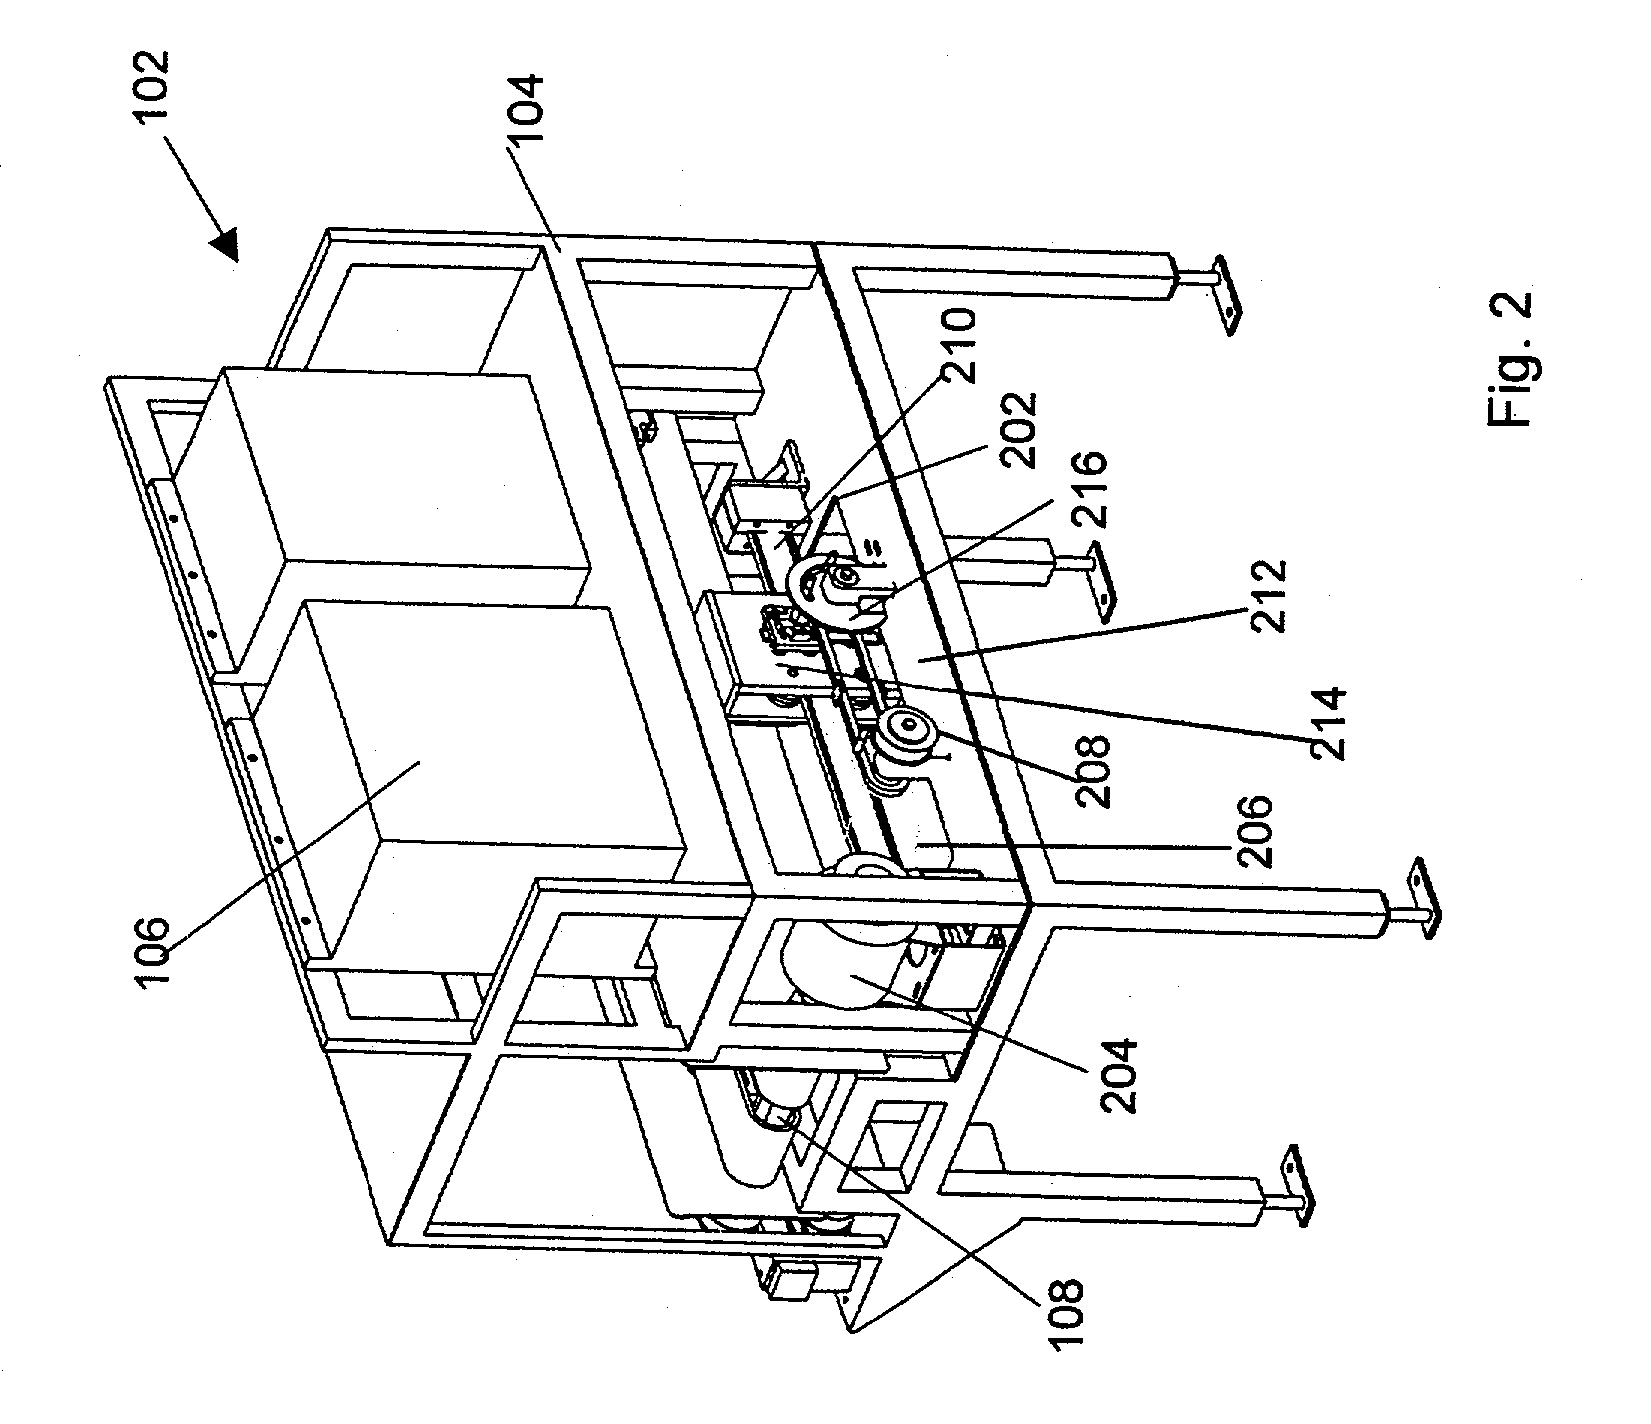 Method and apparatus for meat cut classification of fat thickness for downstream trimming